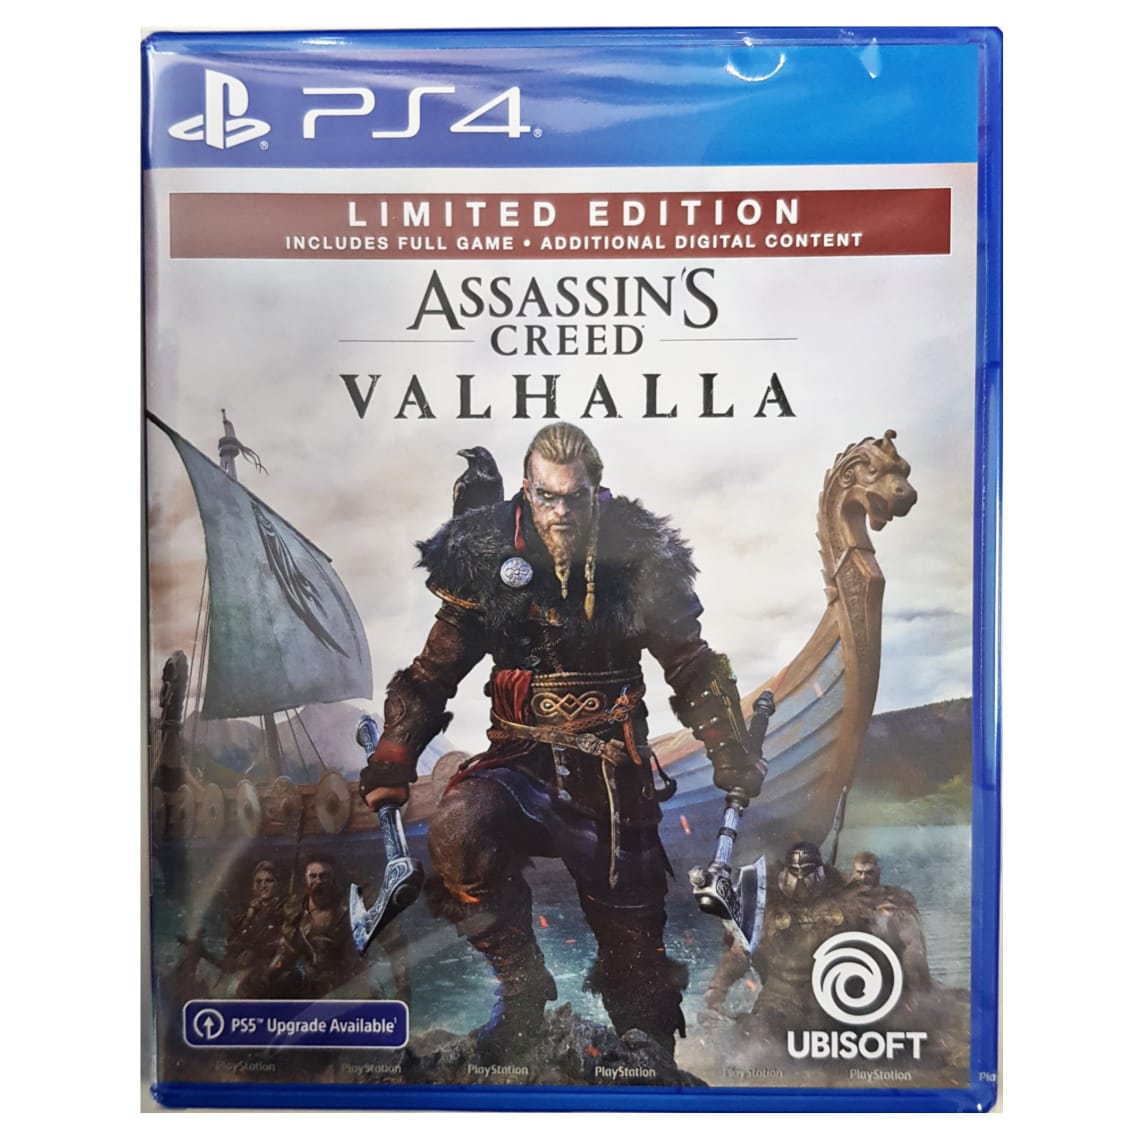 NEW PS4 PS5 XBox Assassin's Creed Valhalla Official Limited Necklace Neckchain 